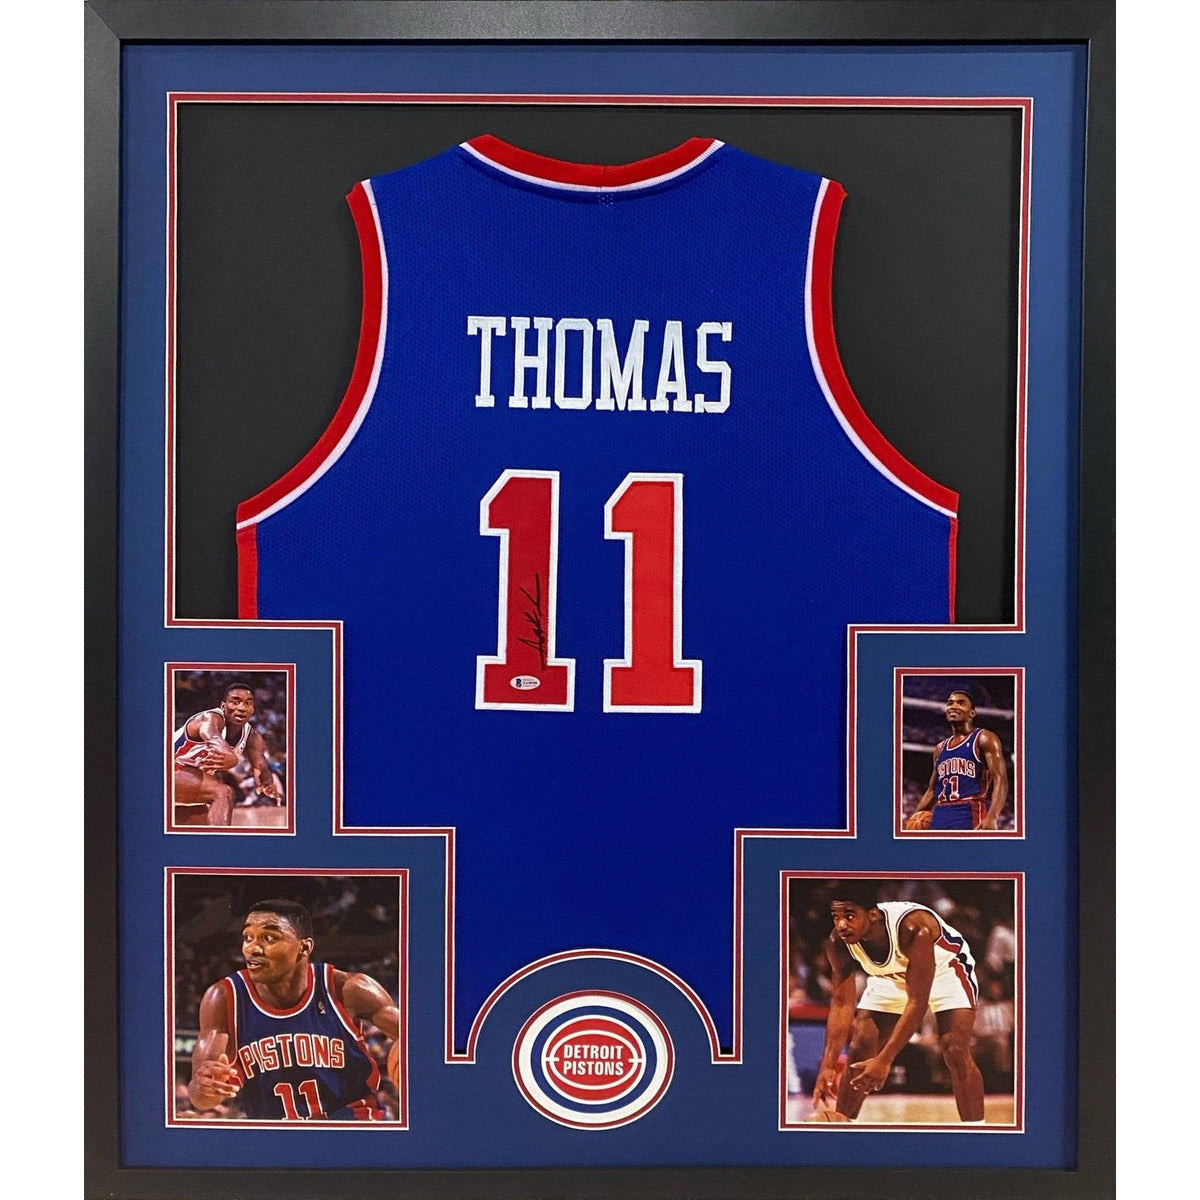 Isiah Thomas Framed Jersey GTSM Autographed Signed Indiana Hoosiers Pistons